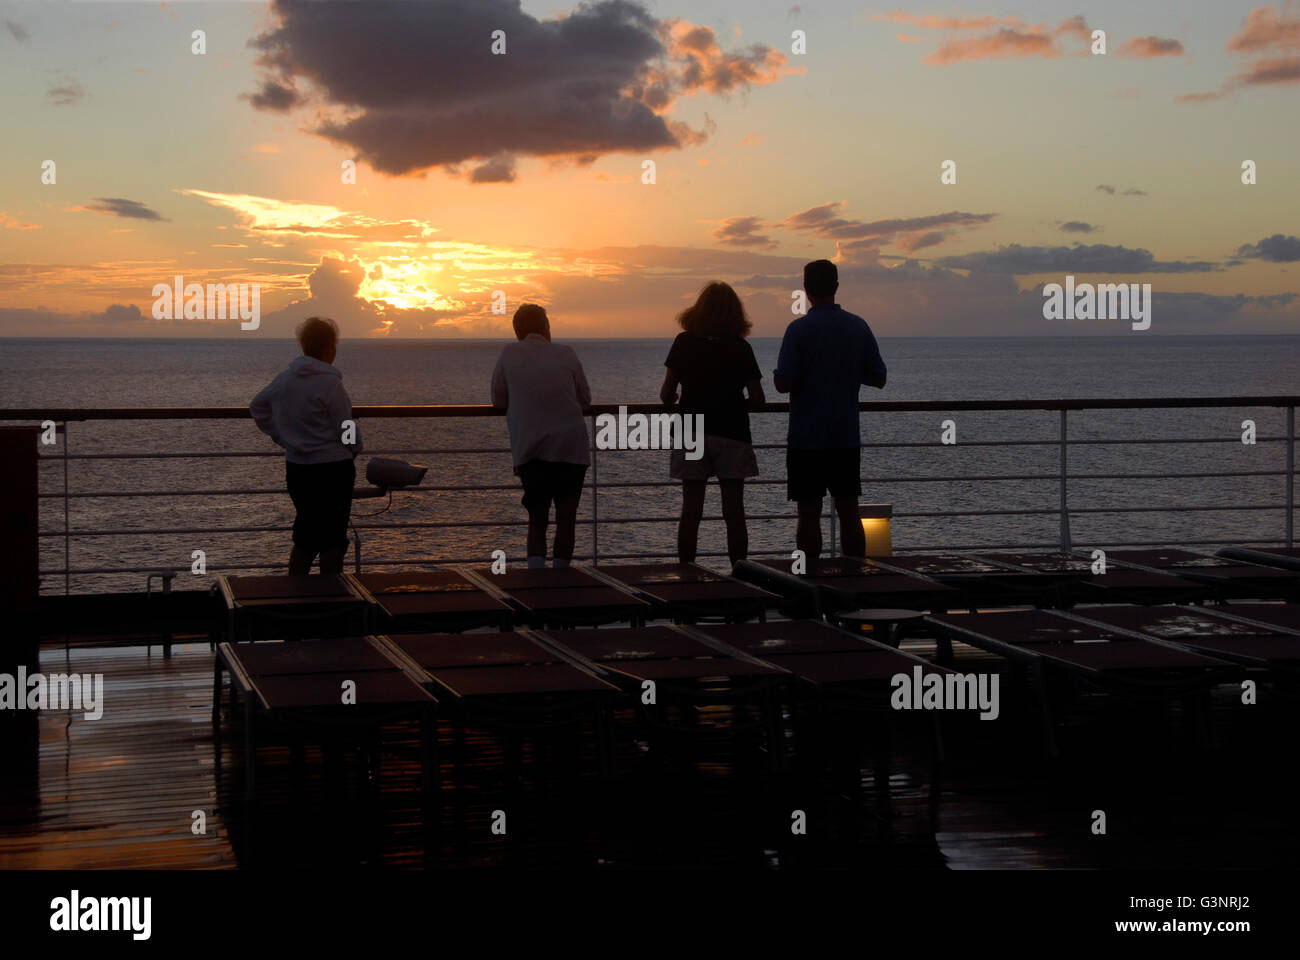 Four people watching the sunset at sea, Caribbean Stock Photo